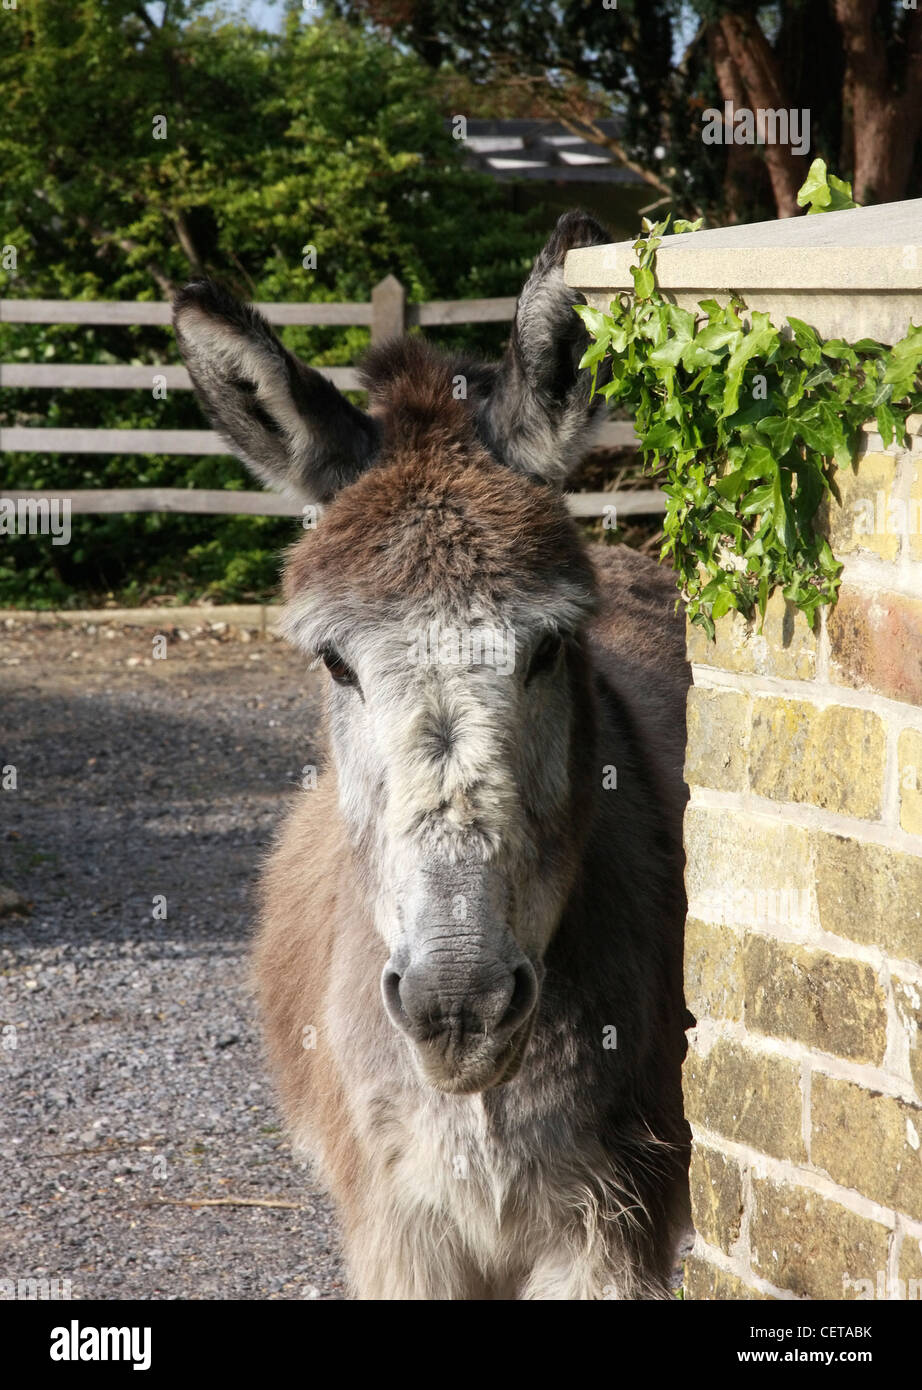 A wild donkey in the New Forest. Stock Photo